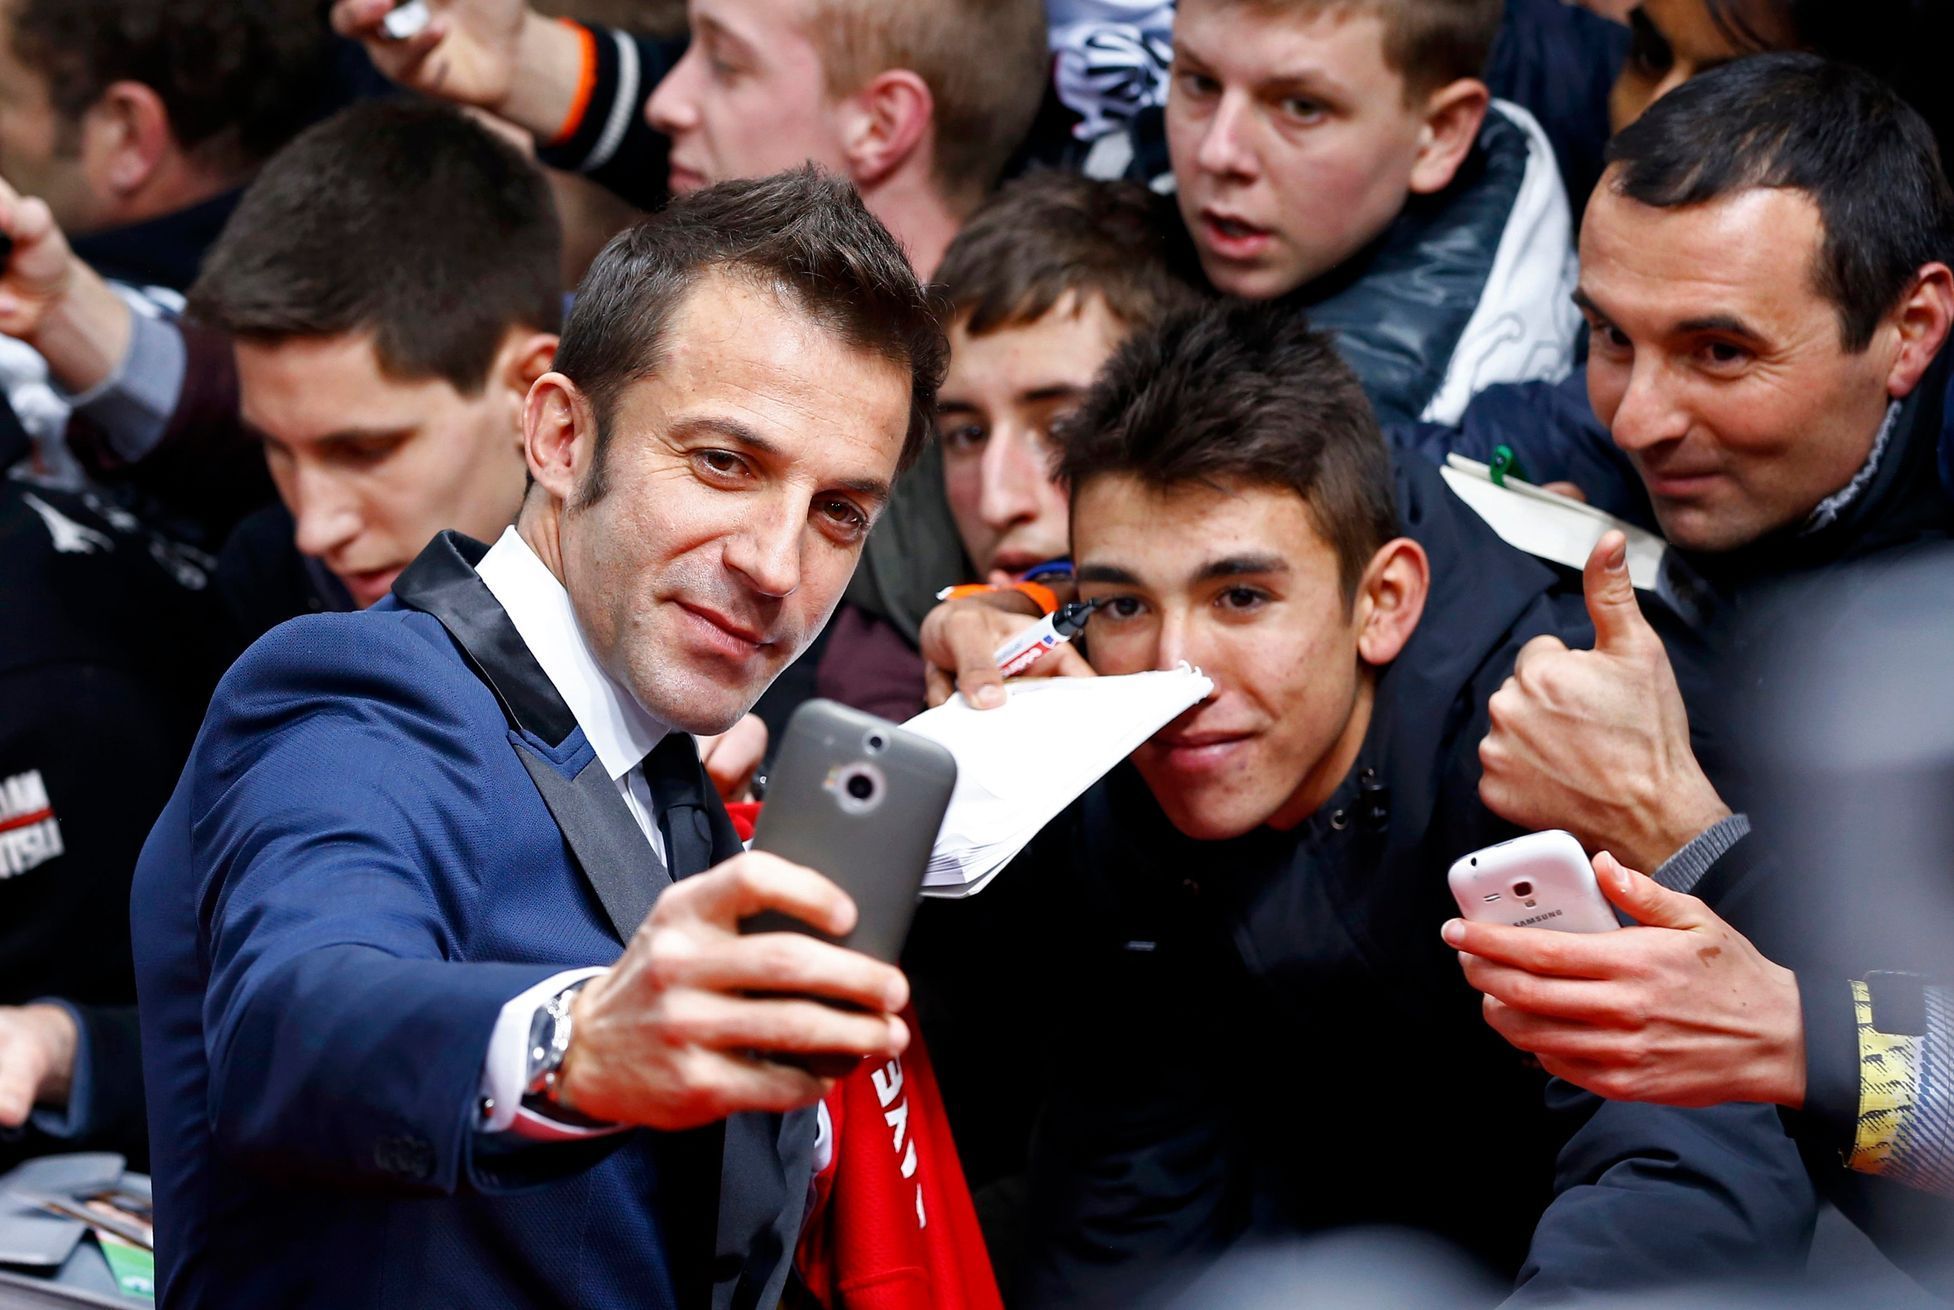 Player Del Piero of Italy takes a 'selfie' with supporters as he arrives for the FIFA Ballon d'Or 2014 soccer awards ceremony at the Kongresshaus in Zurich